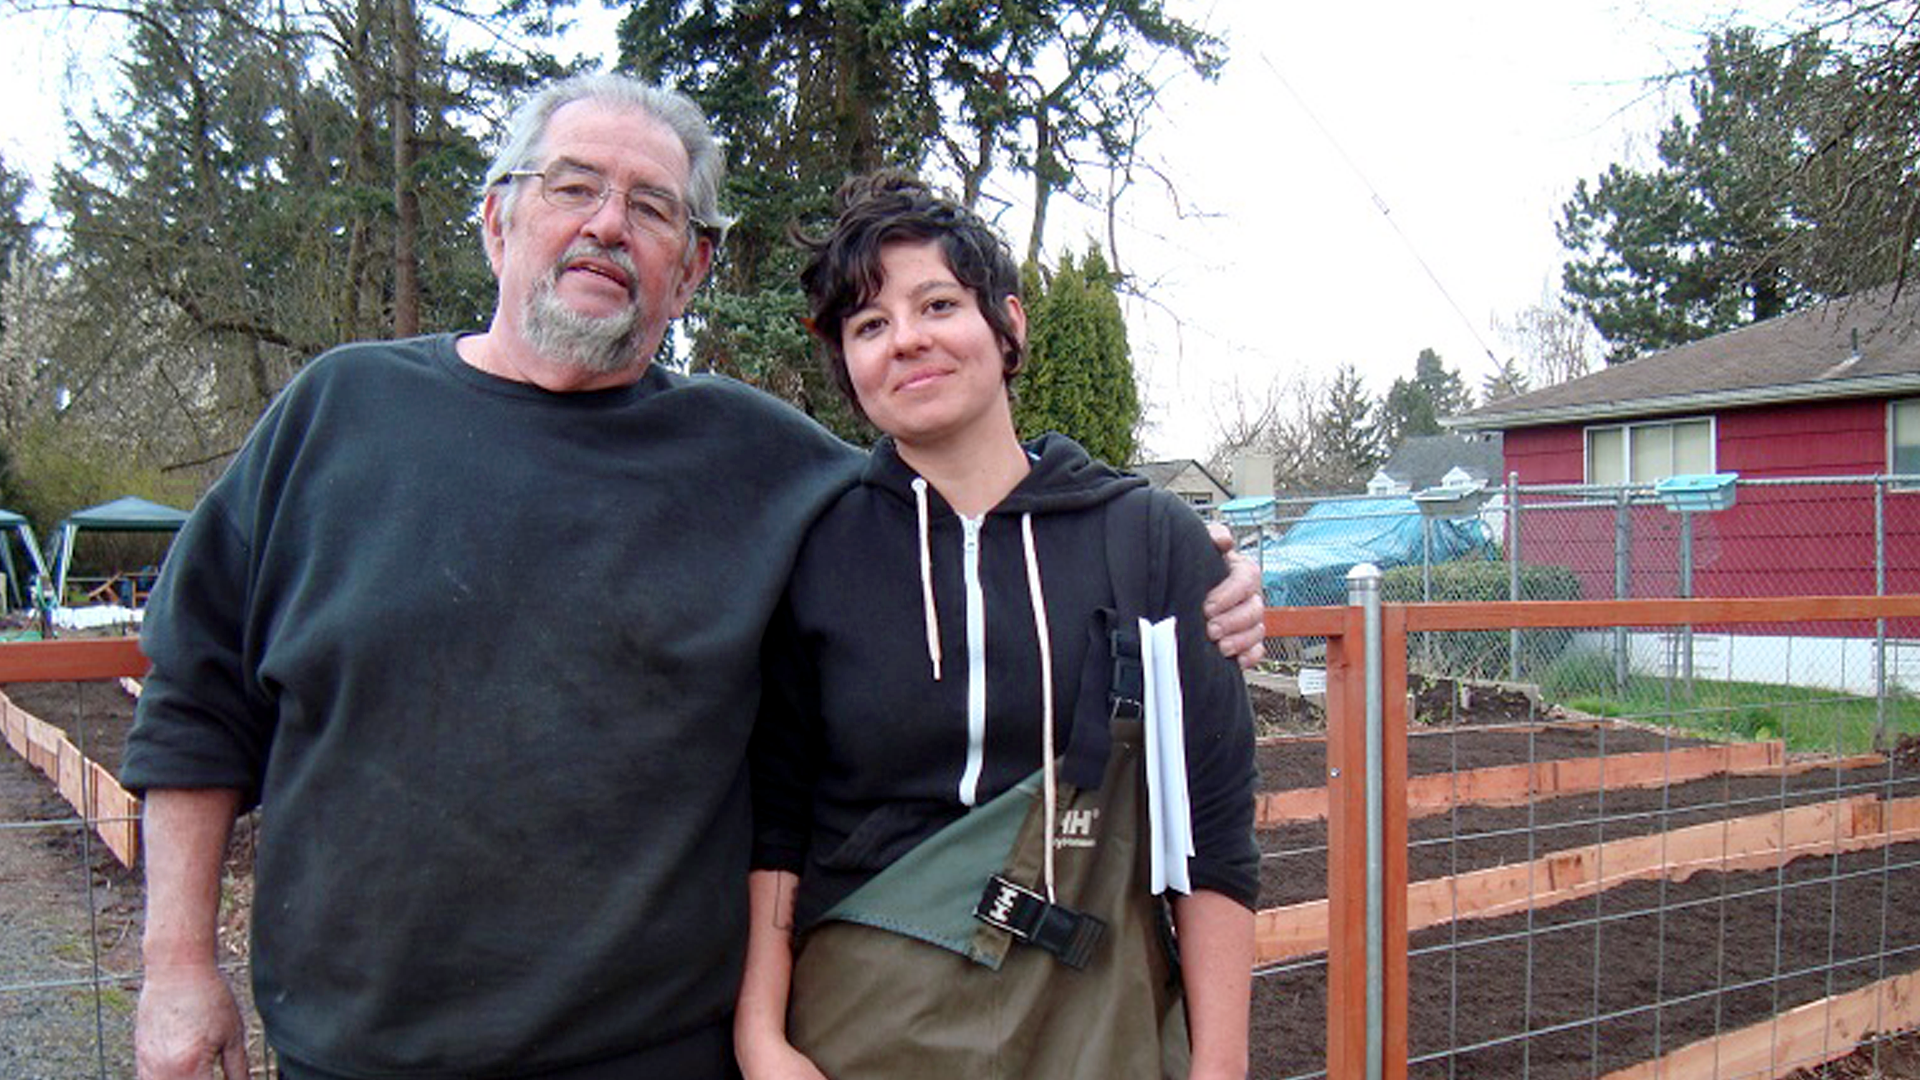 Remembering Her Father, Urban Farmer Hosts ‘Lost Table’